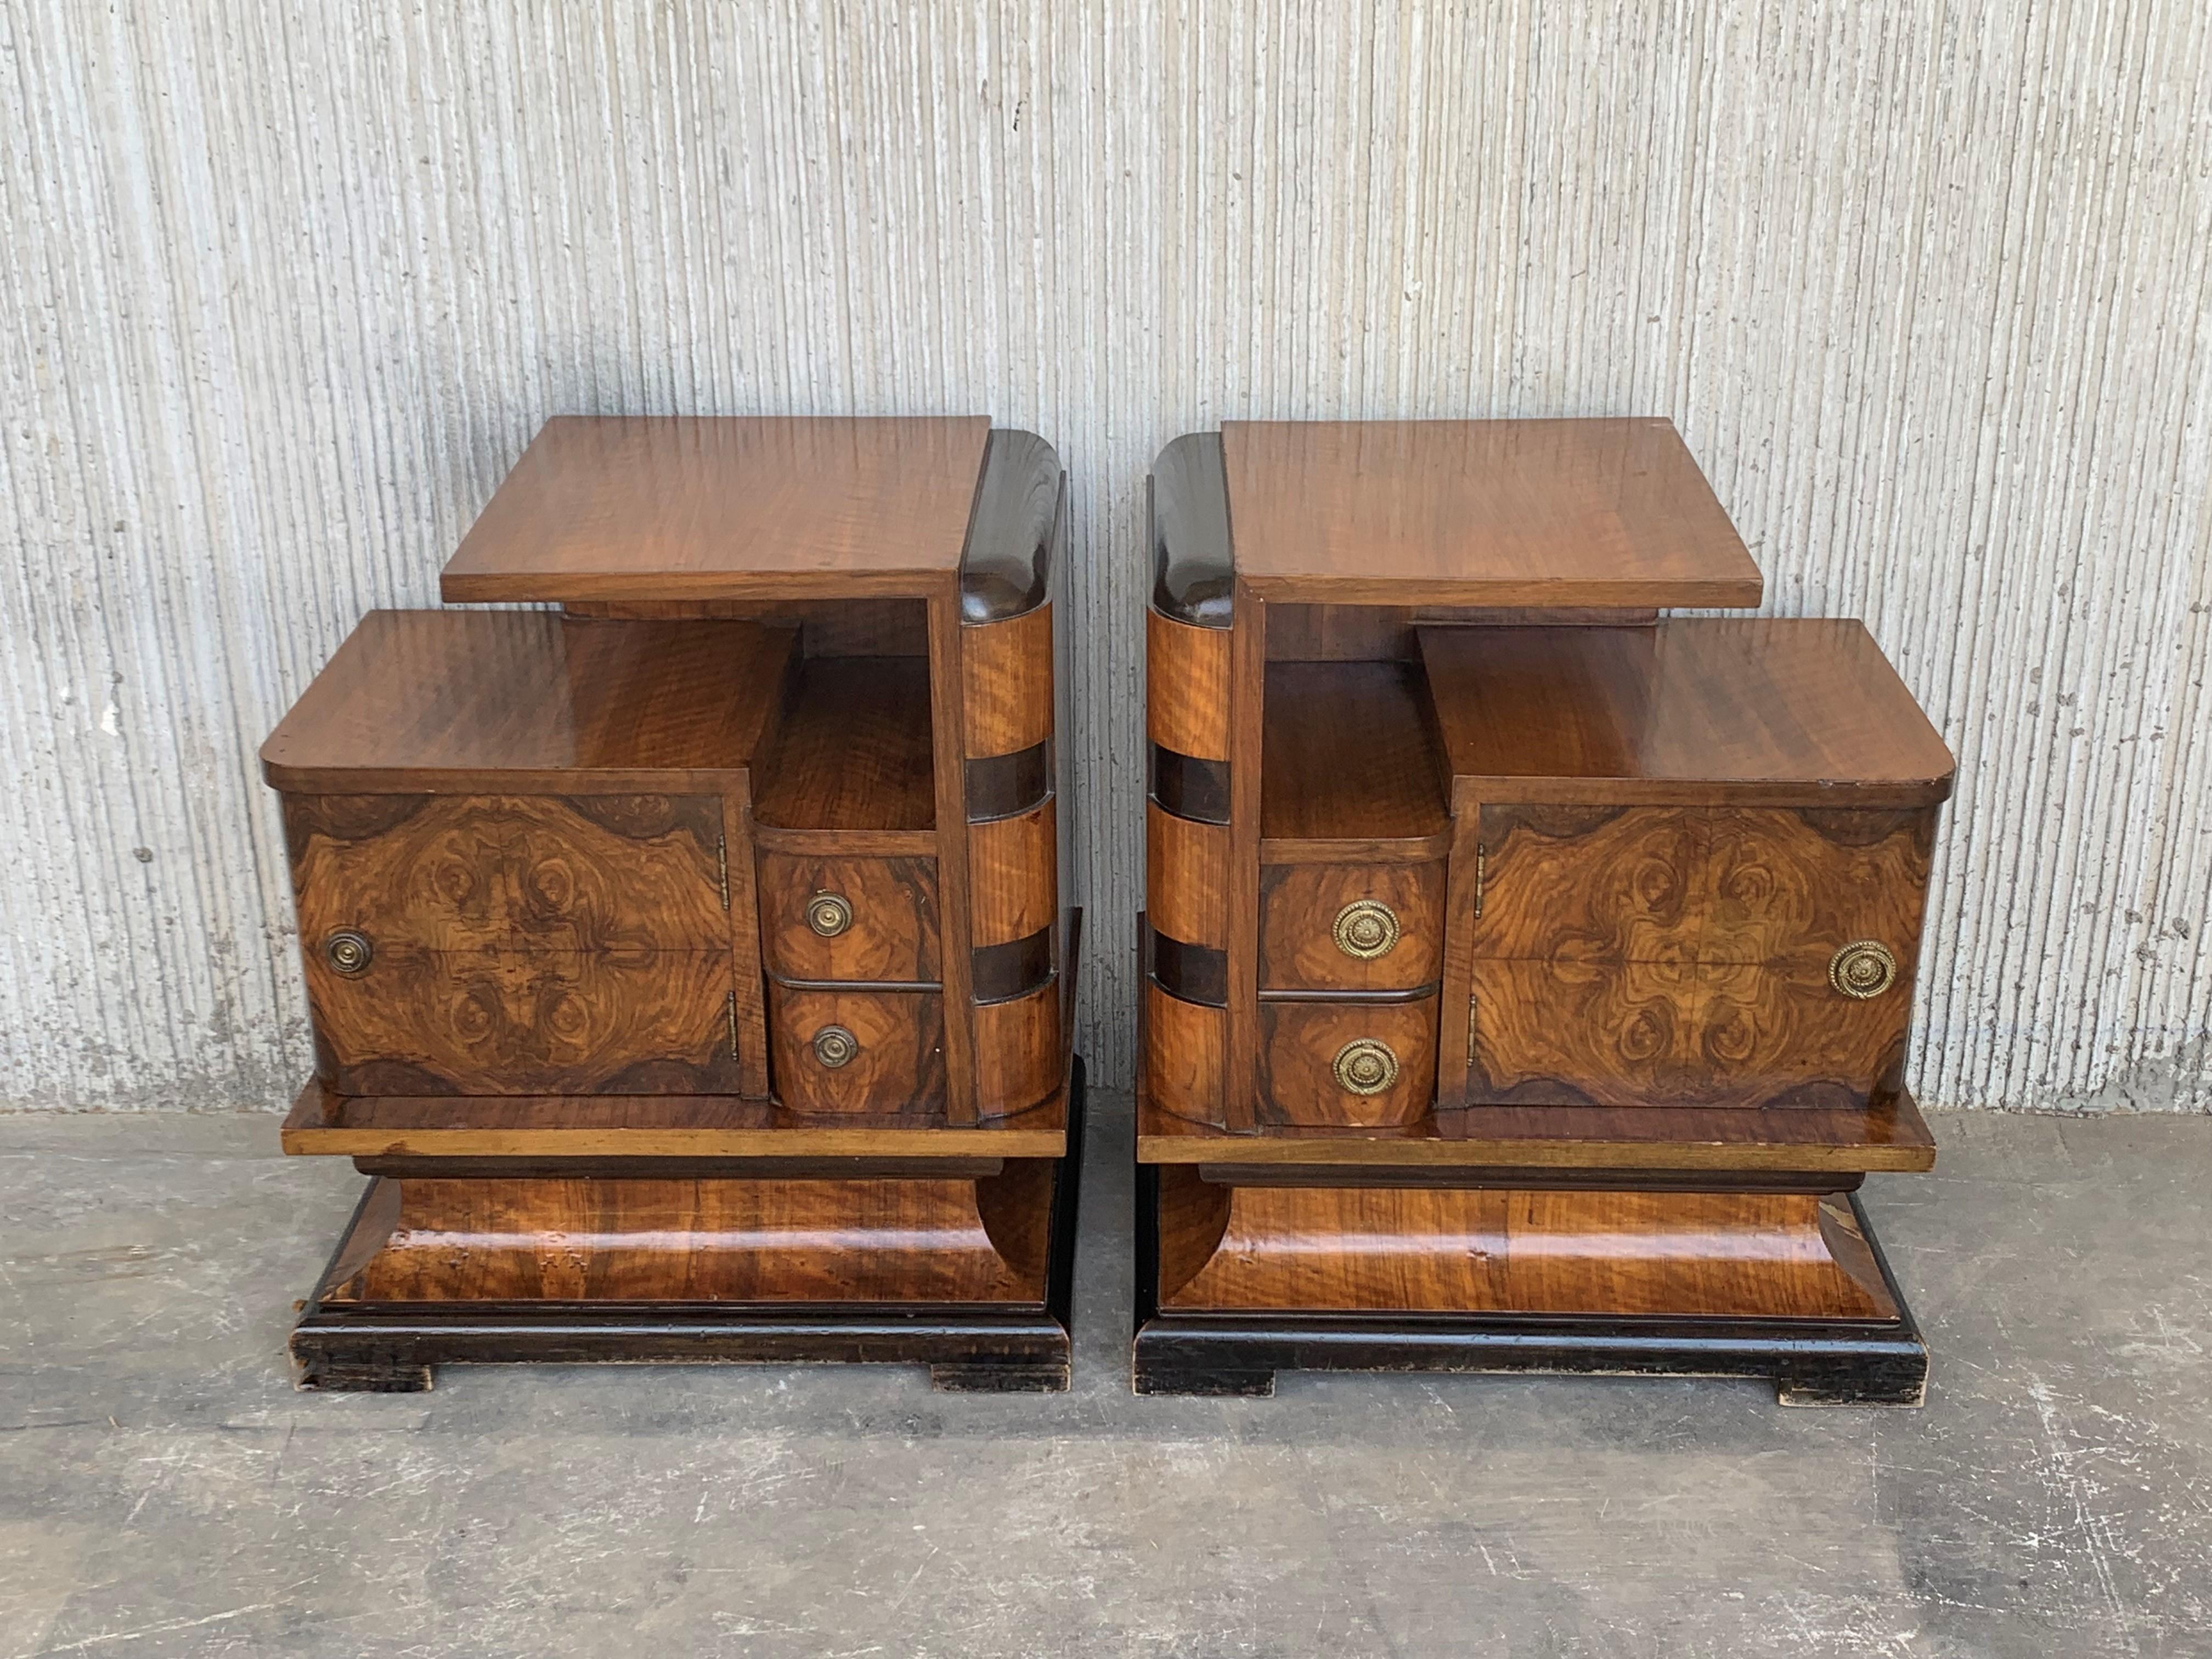 20th century Art Deco carved pair of nightstands - bedsides with doors and two drawers.

Height to the 1st shelve: 18.5in.
 